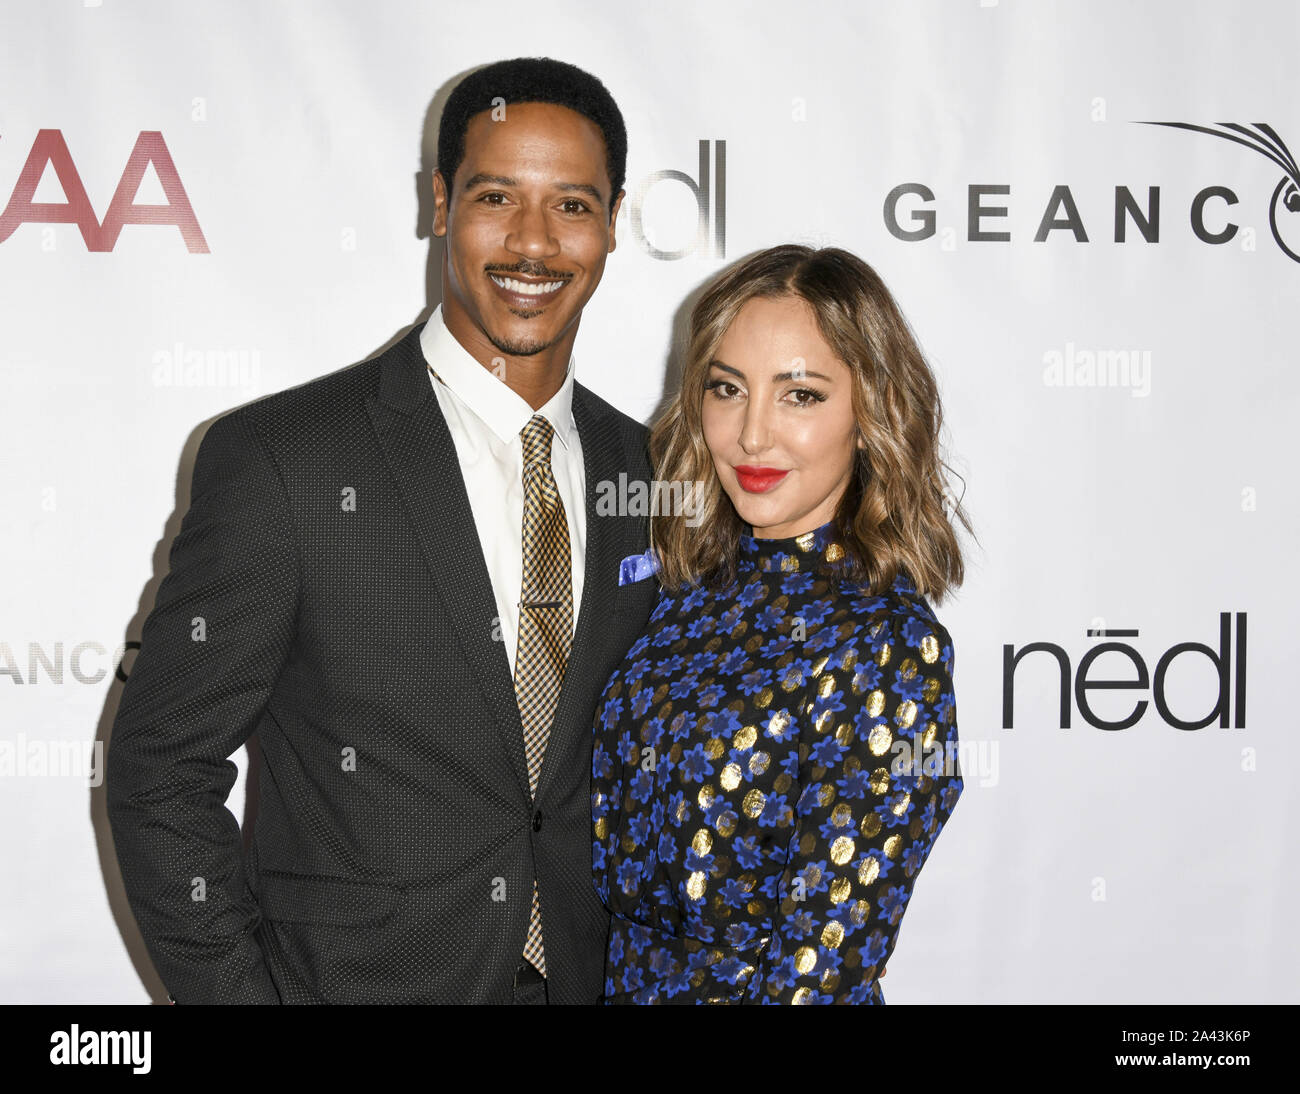 October 10, 2019, Los Angeles, California, USA: BRIAN J. WHITE and PAULA DA SILVA attend the GEANCO Foundation 2019 Hollywood Gala at SLS Hotel in Beverly Hills, California. (Credit Image: © Charlie Steffens/ZUMA Wire) Stock Photo